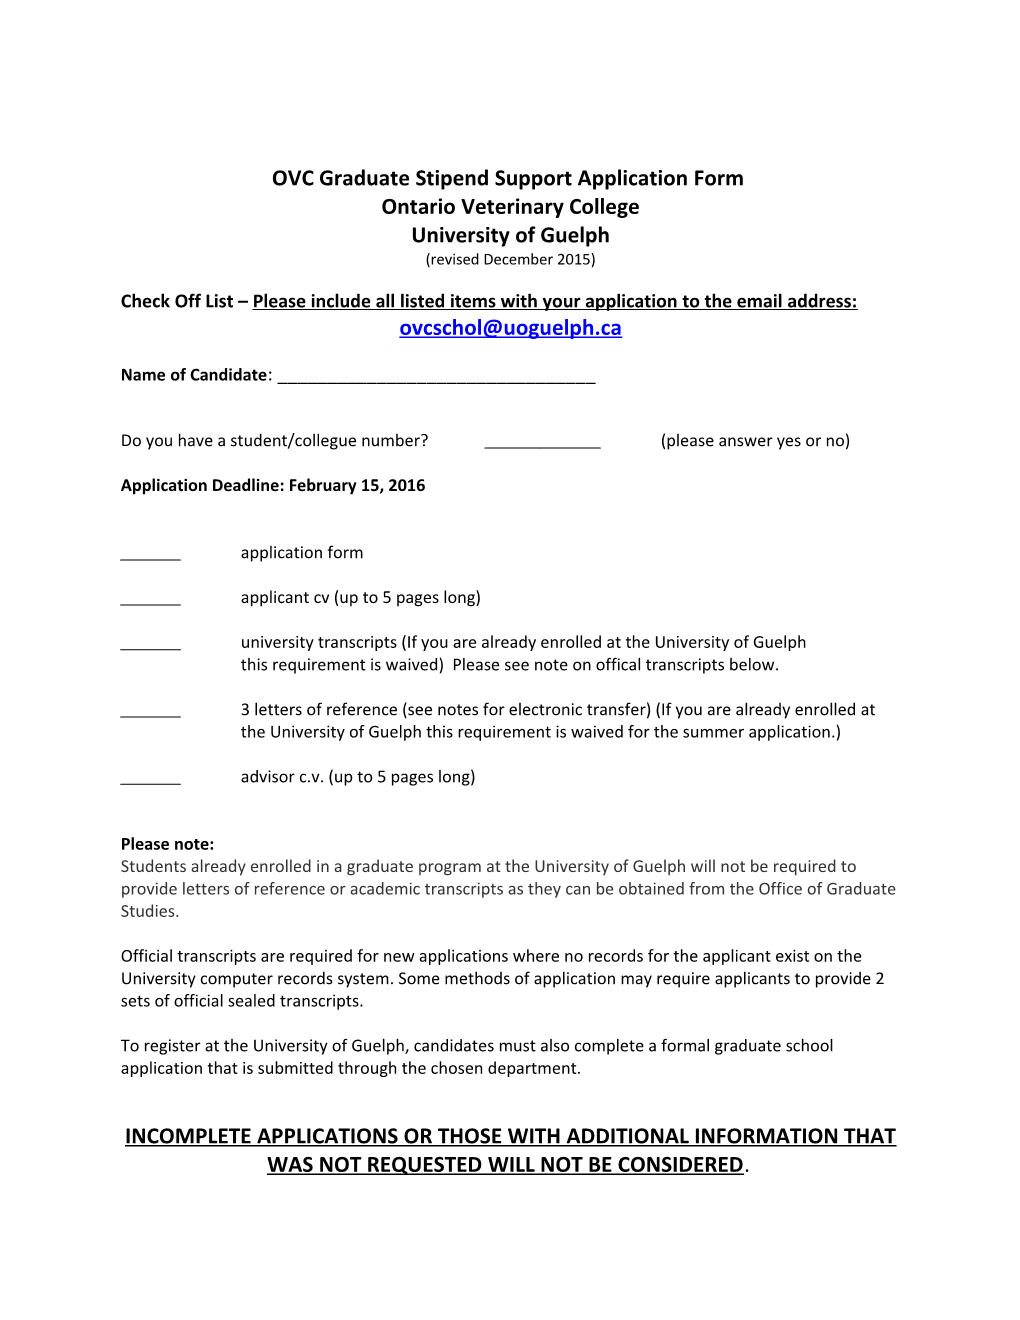 OVC Graduate Stipend Support Application Form